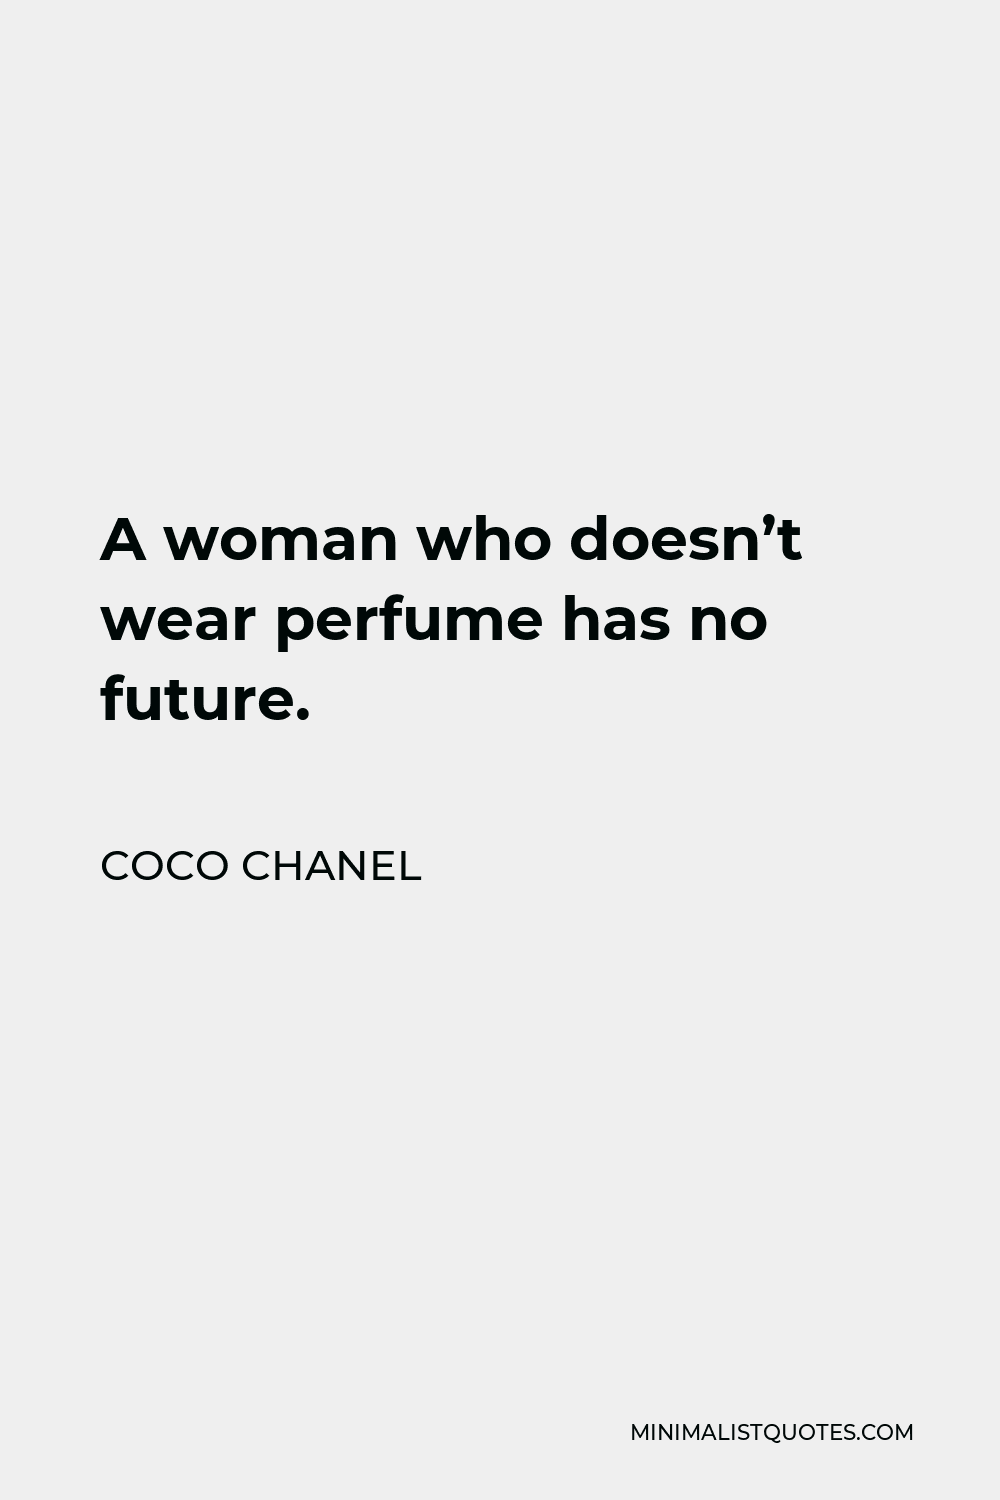 Perfume Quote by Clint Hess for Siege Media on Dribbble